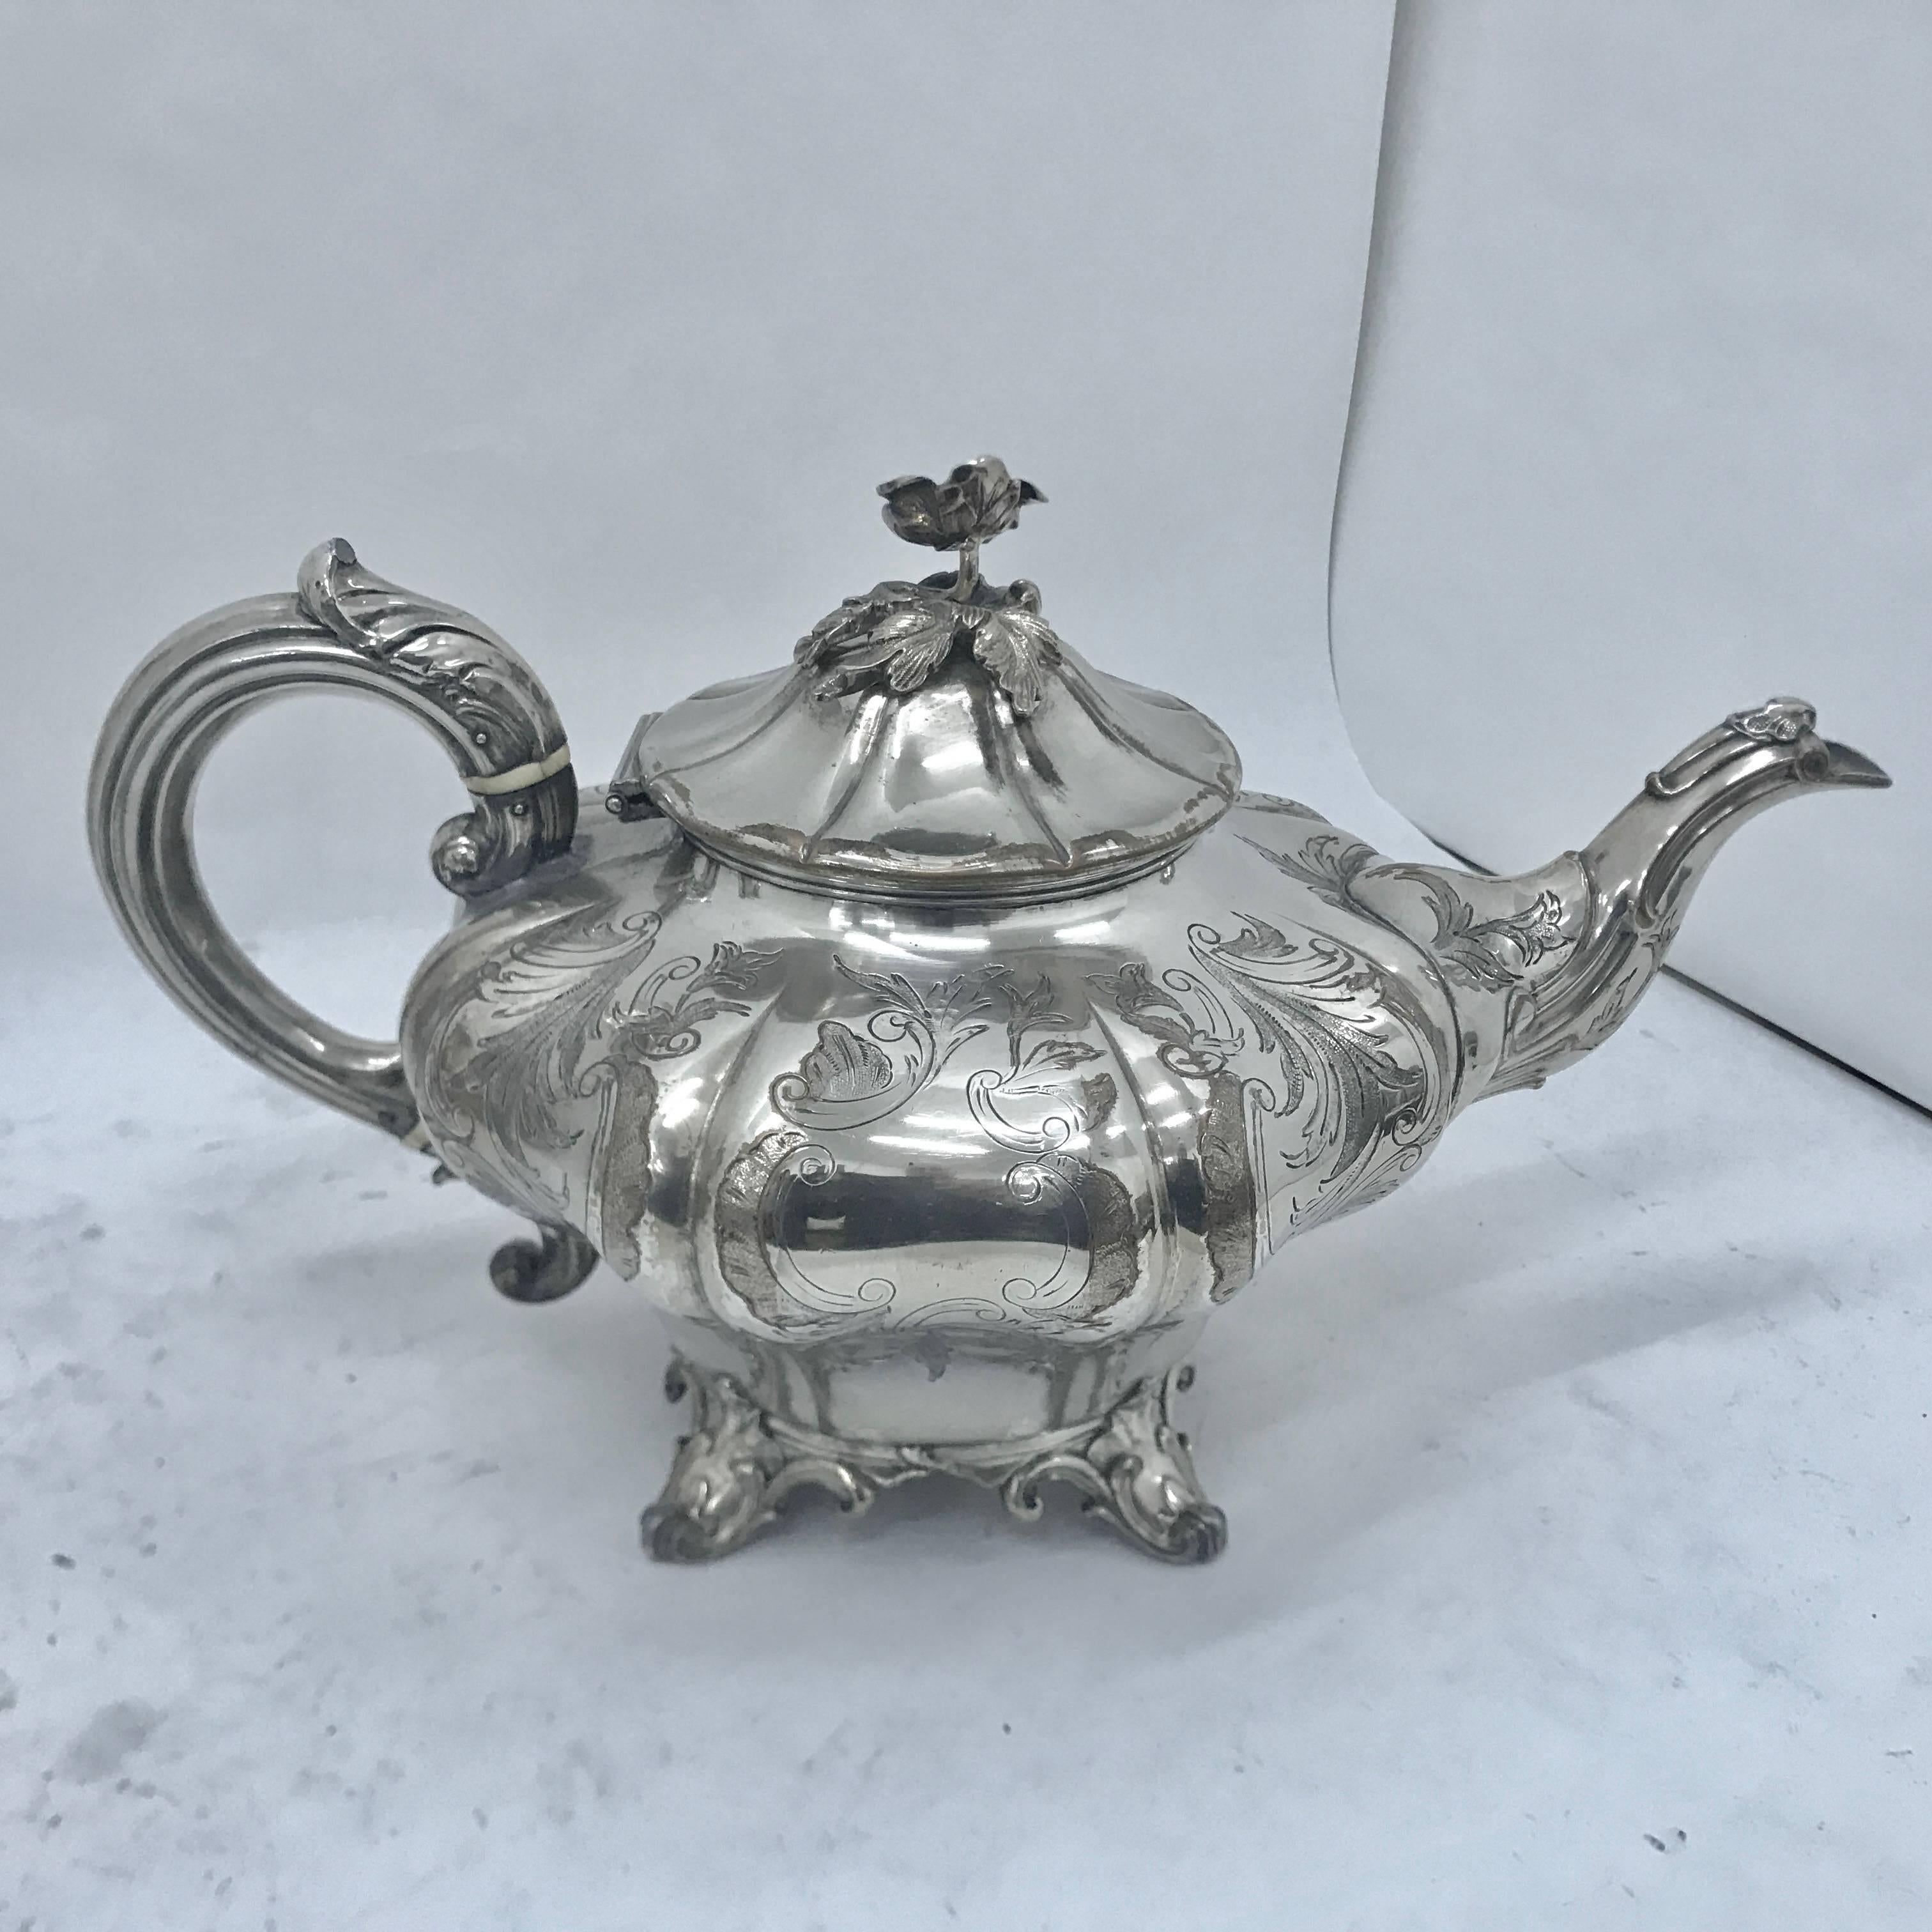 Superb tea service by James Dixon, marked, 1833. Good conditions overall, just minor losses in plating. Tea pot height cm 16.